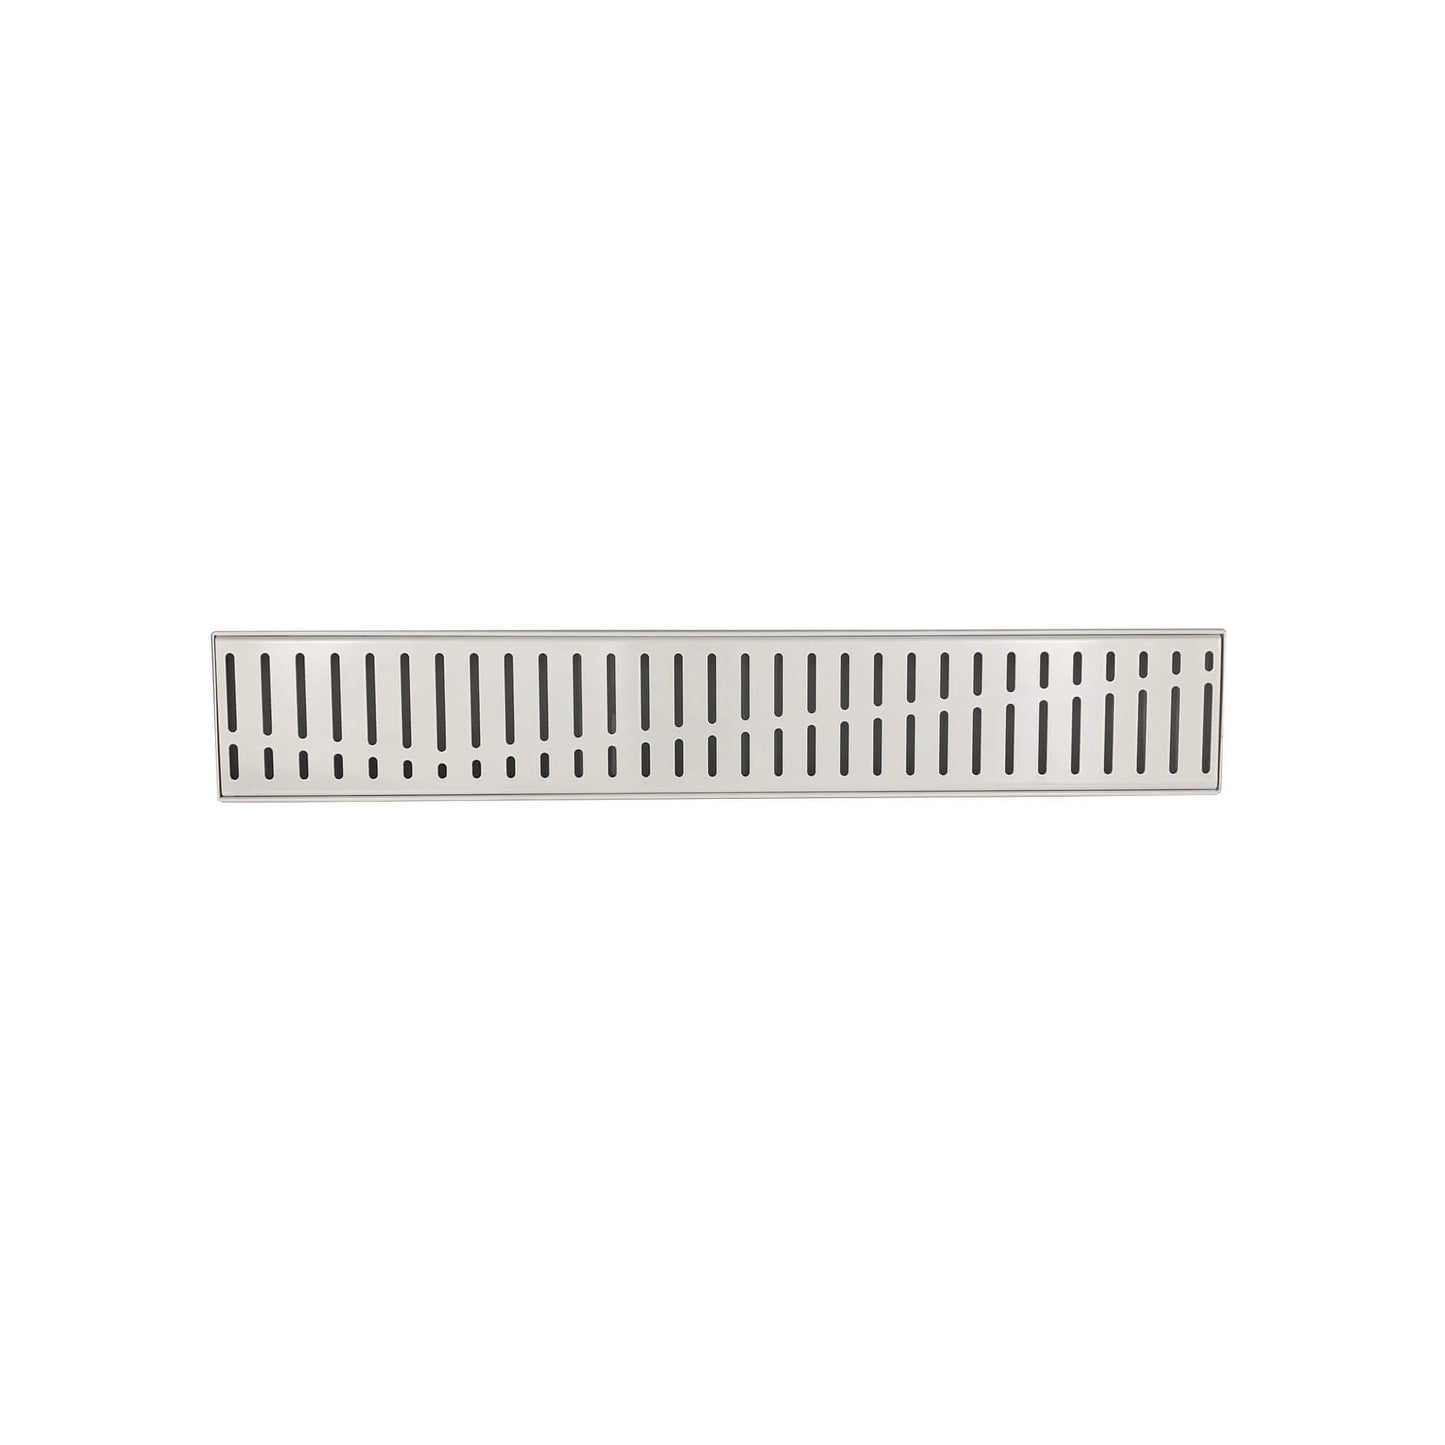 Custom Made Flow Pattern Grate & Channel Drain -  White